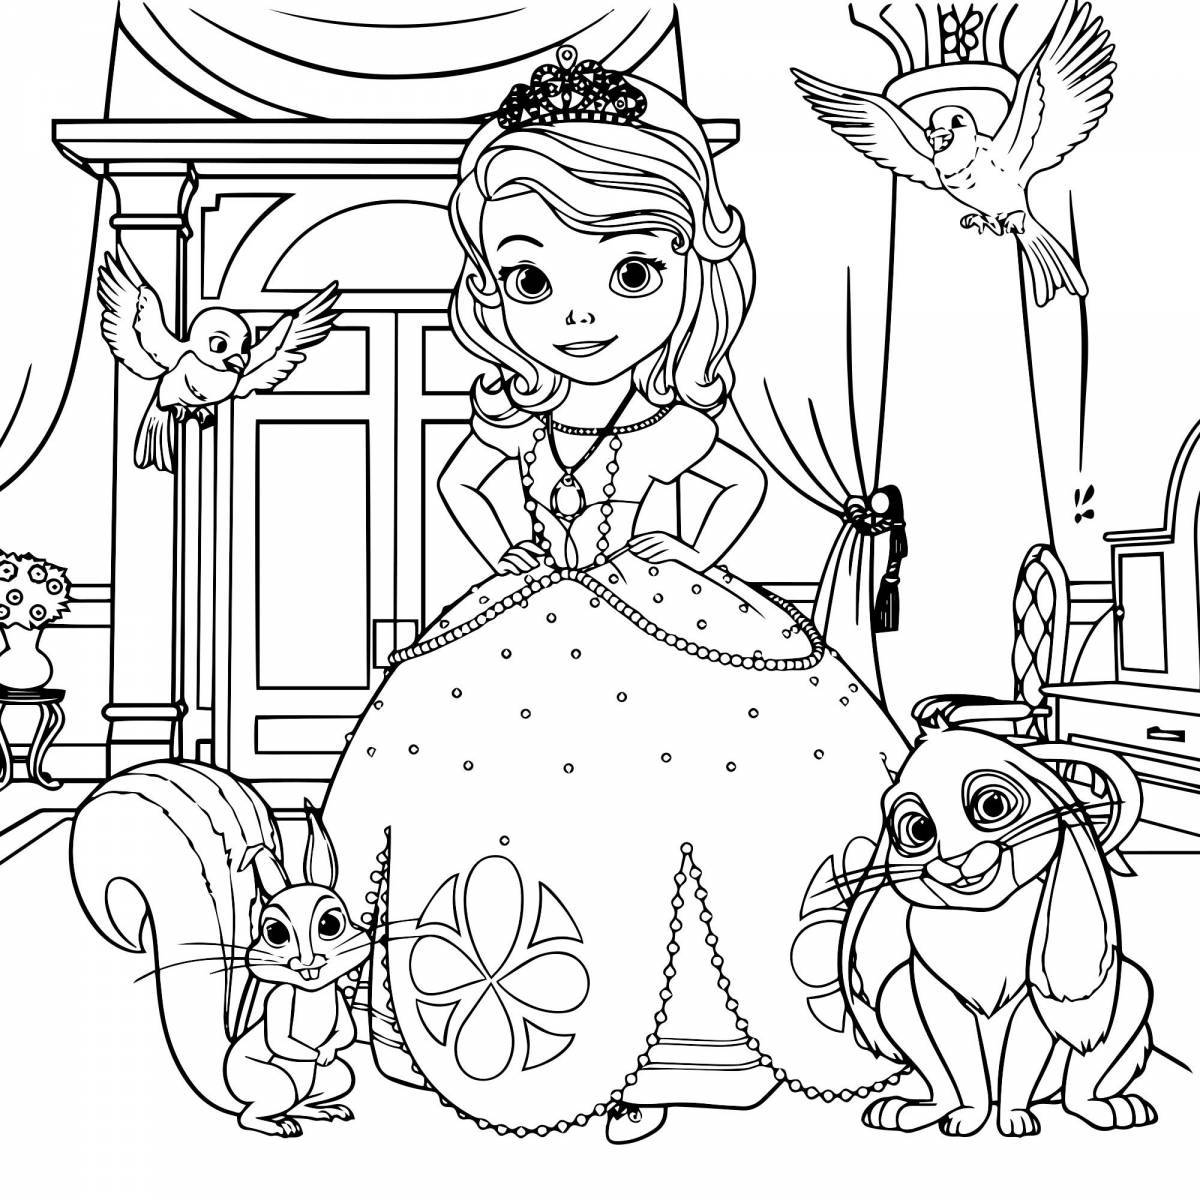 Funny princess coloring pages for kids